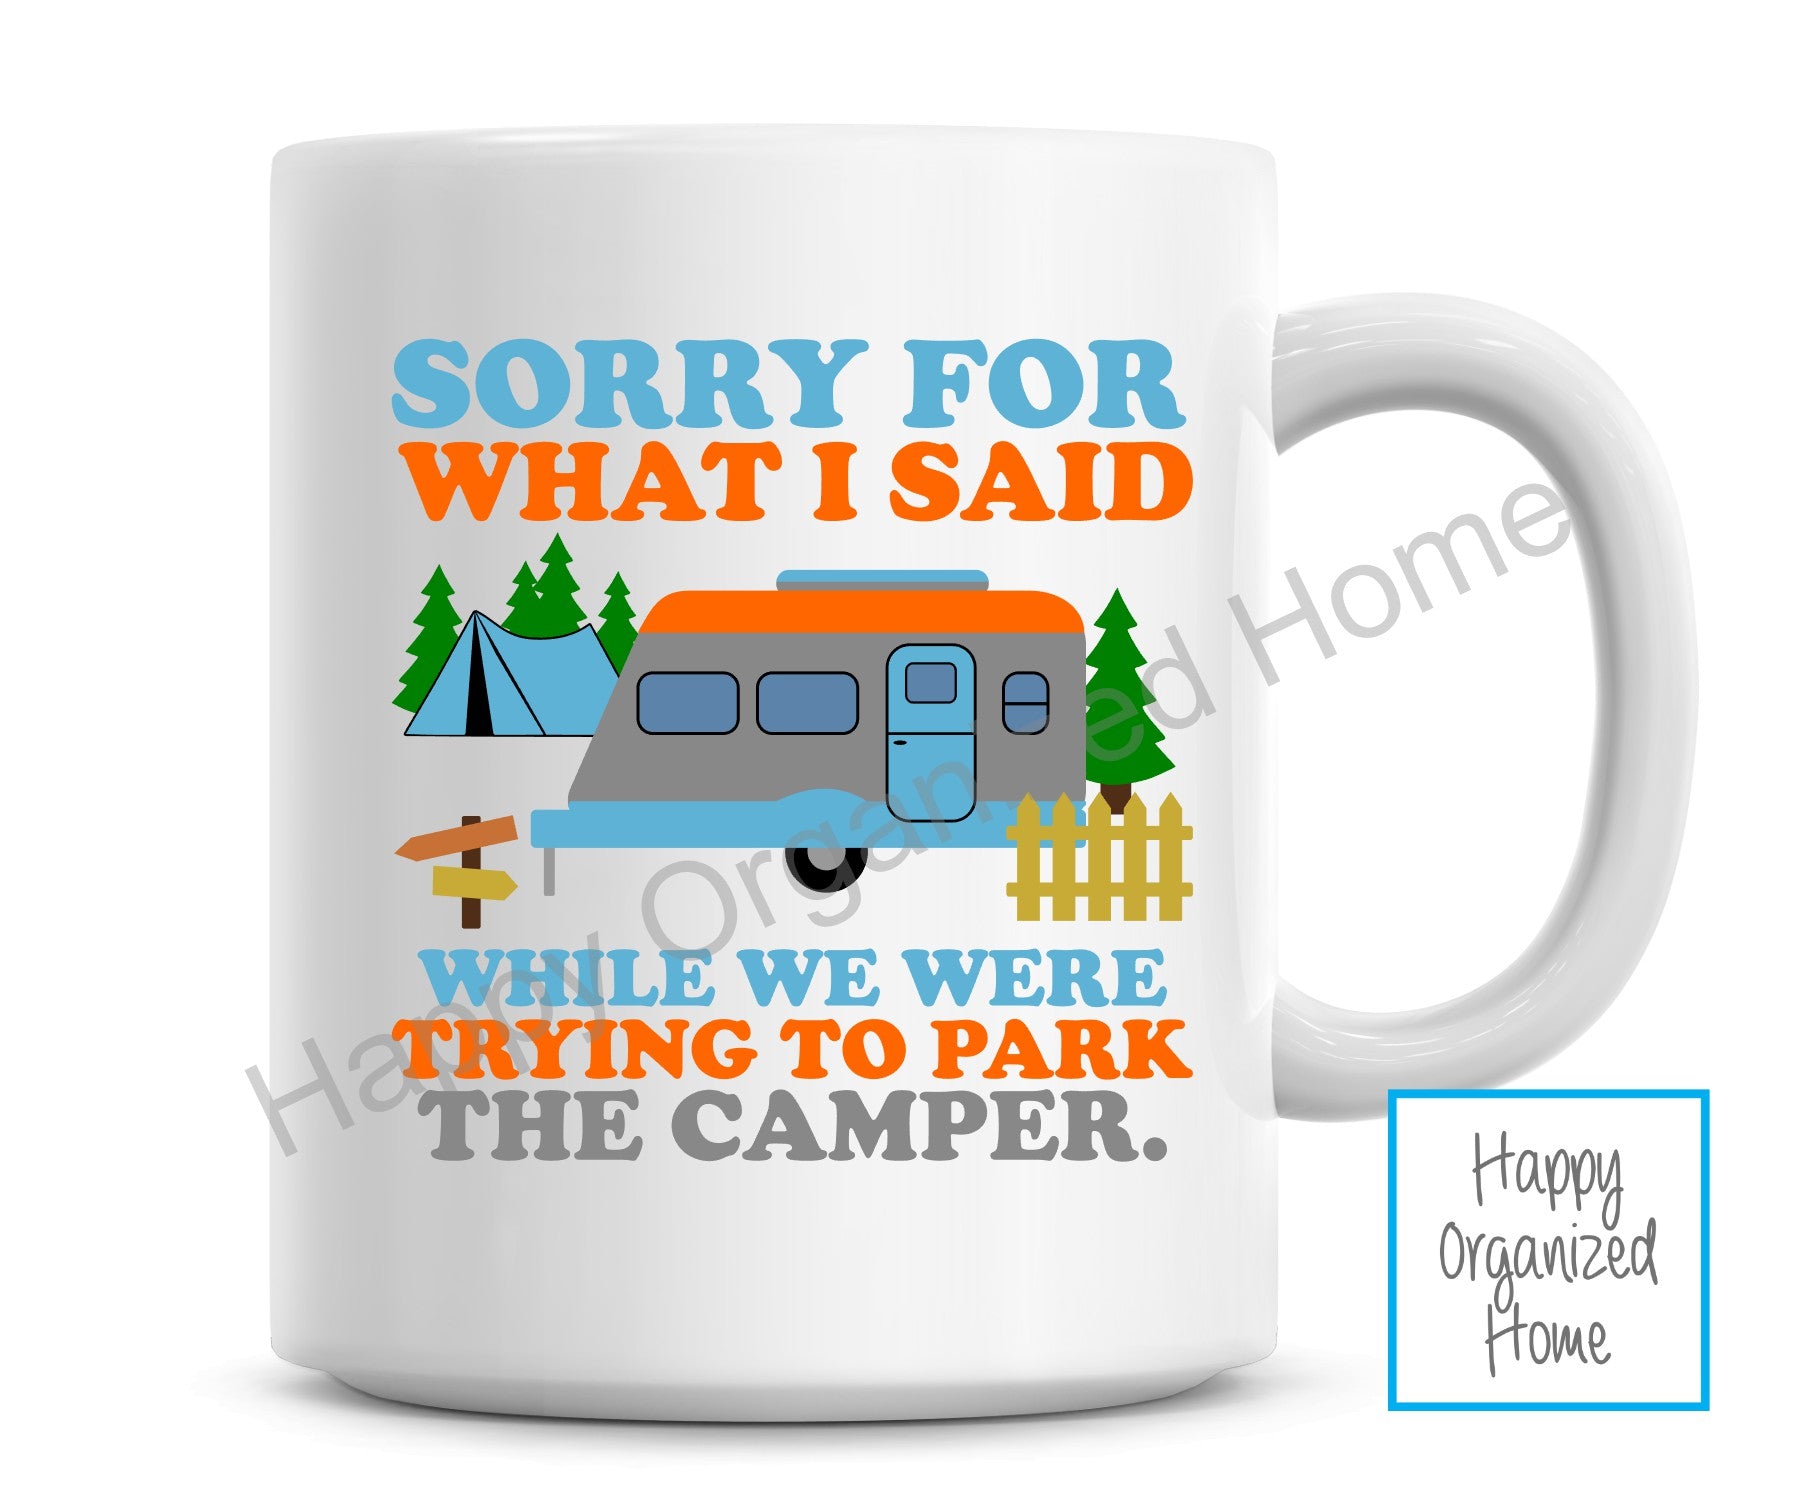 Sorry for what I said when we were trying to park the camper. Ceramic mug